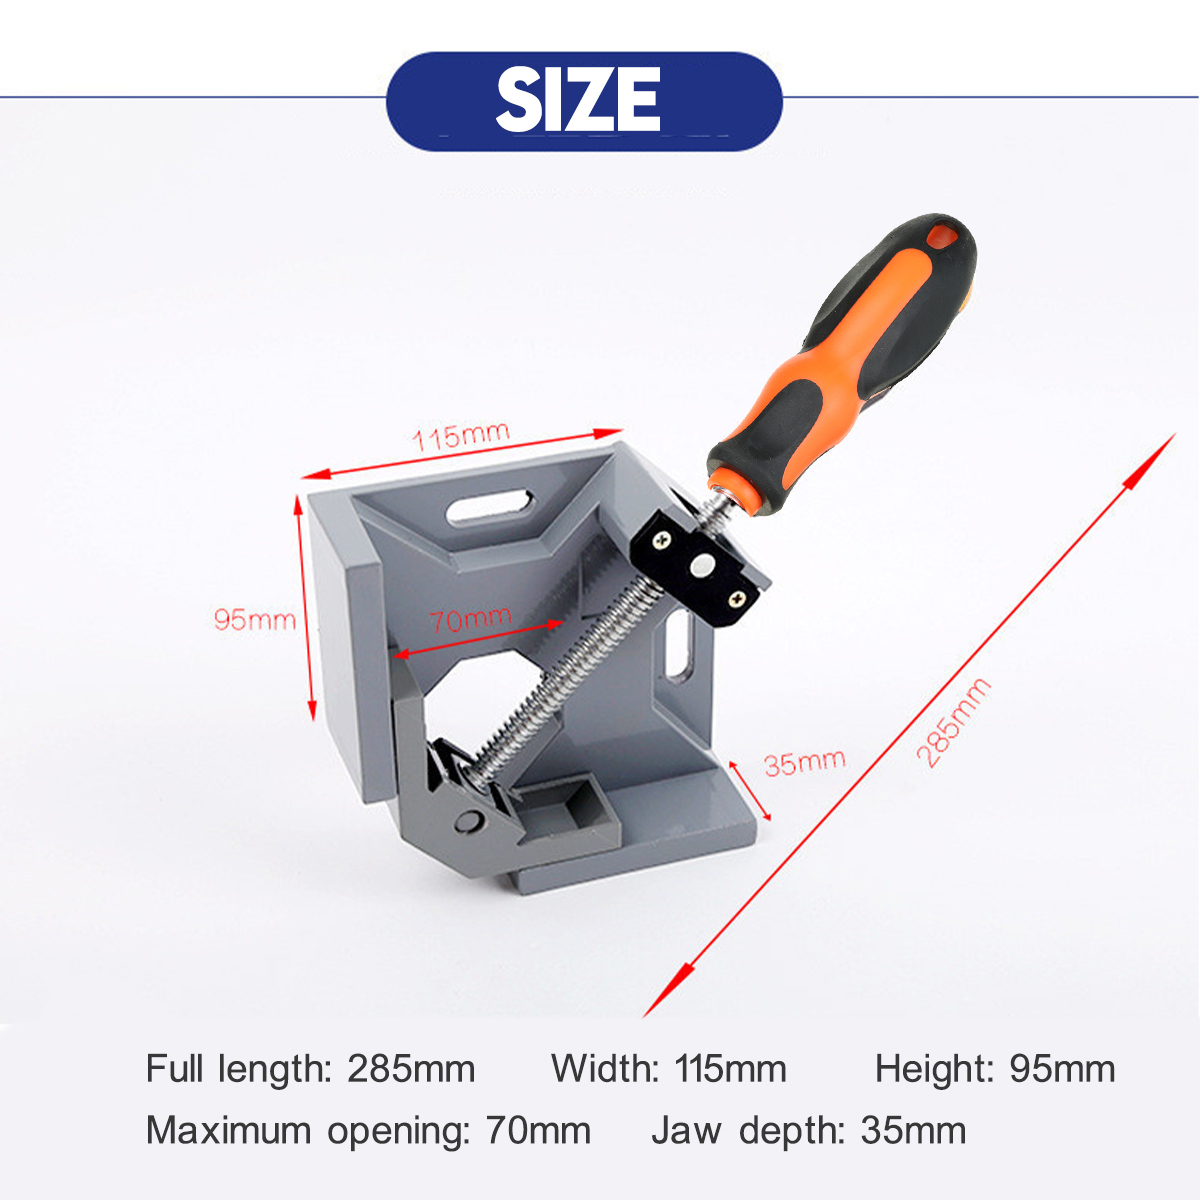 90-Degree-Quick-Release-Corner-Clamp-Right-Angle-Welding-Woodworking-Photo-Frame-Clamping-Tool-1768833-5